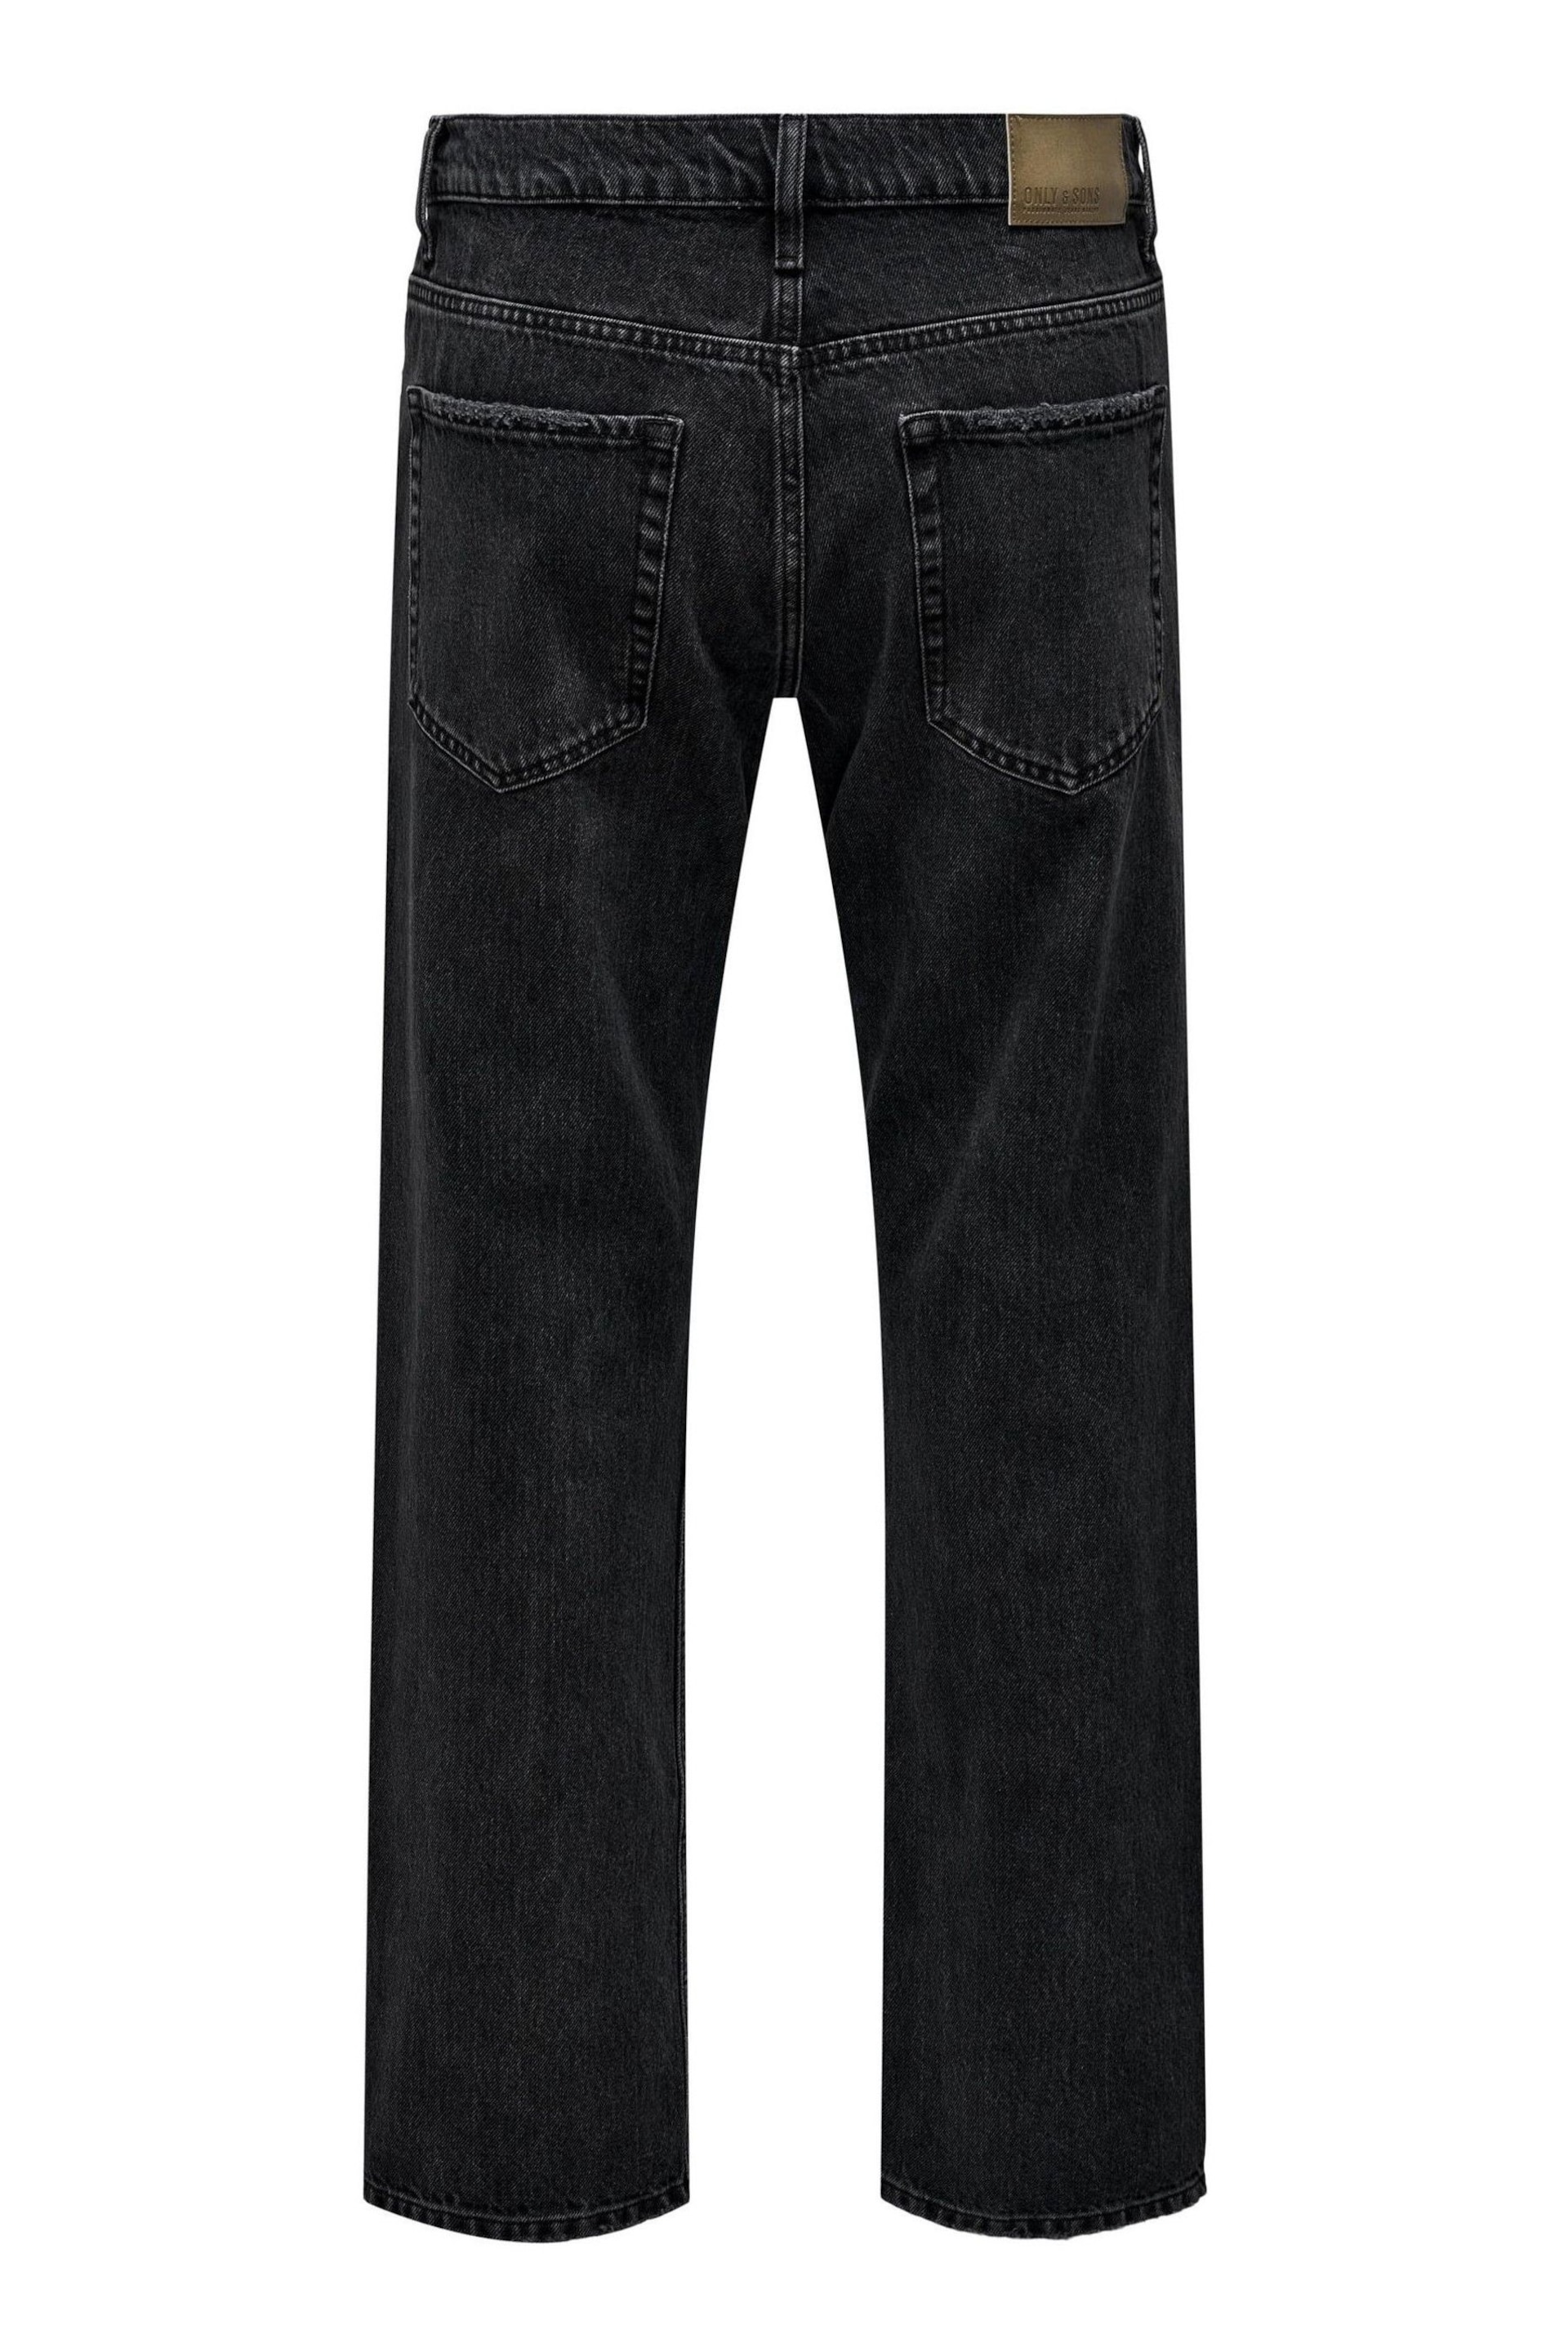 Only & Sons Black Straight Leg Jeans - Image 6 of 6